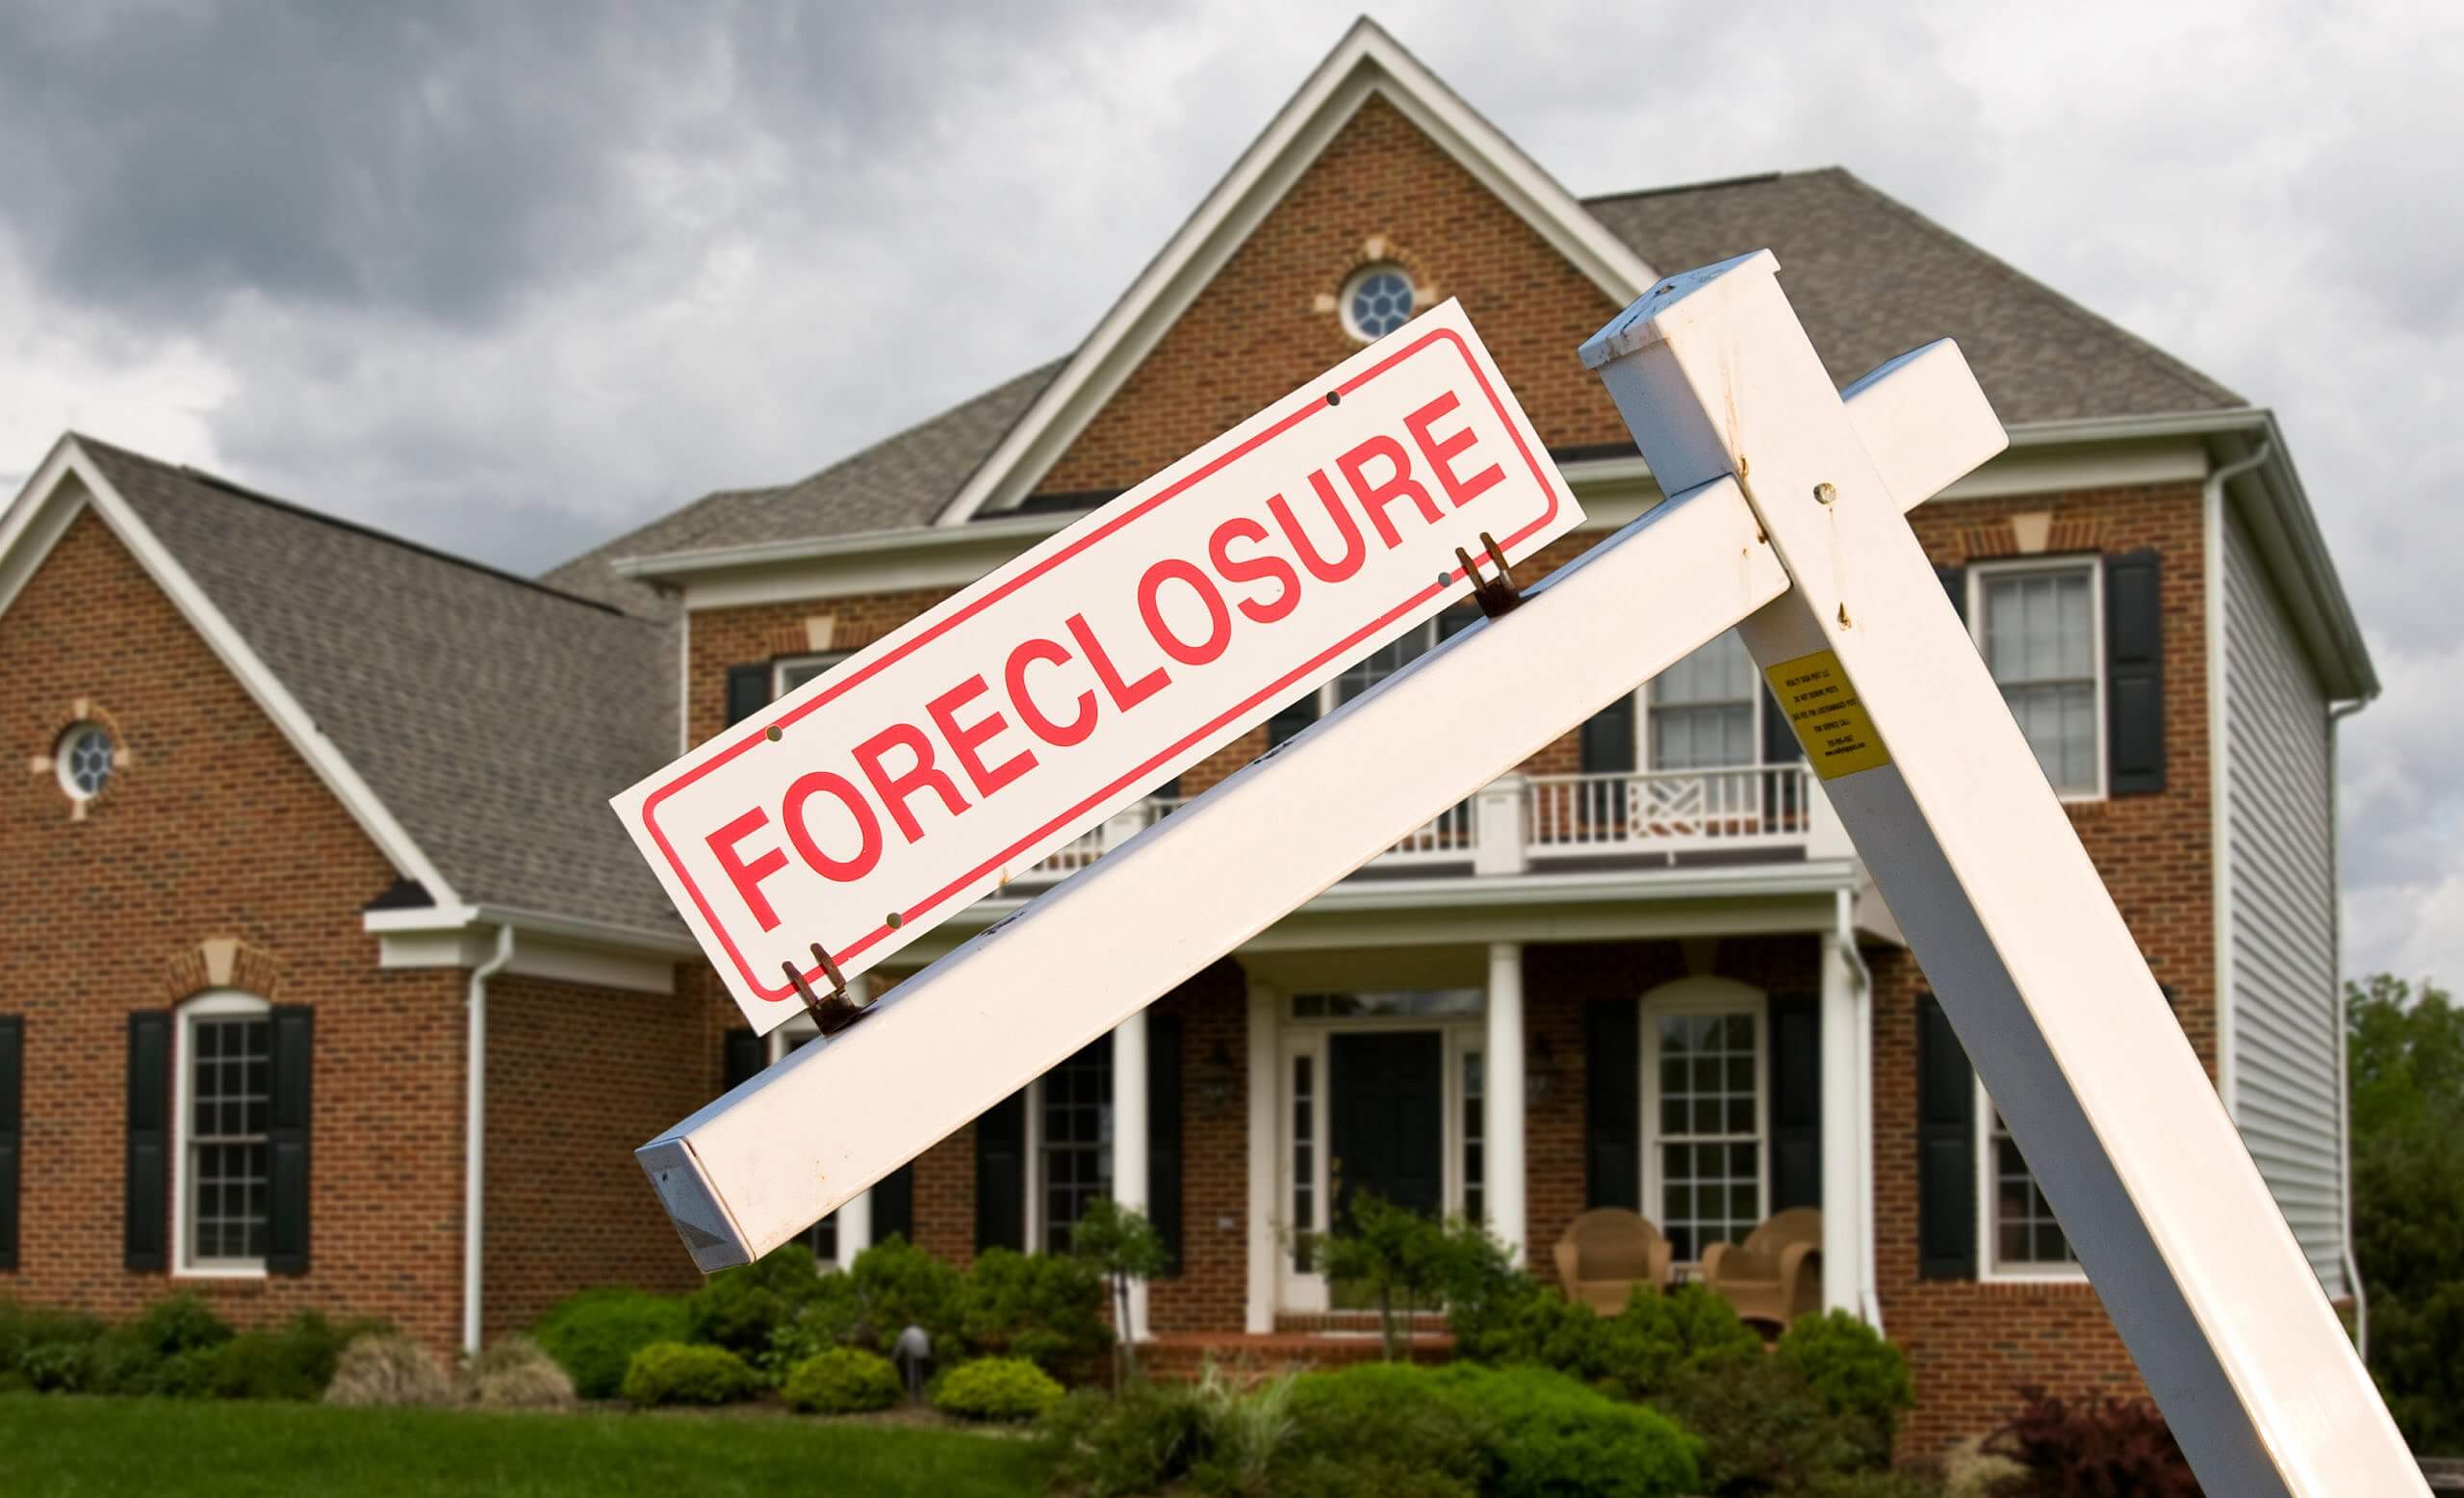 wrongful foreclosure of home